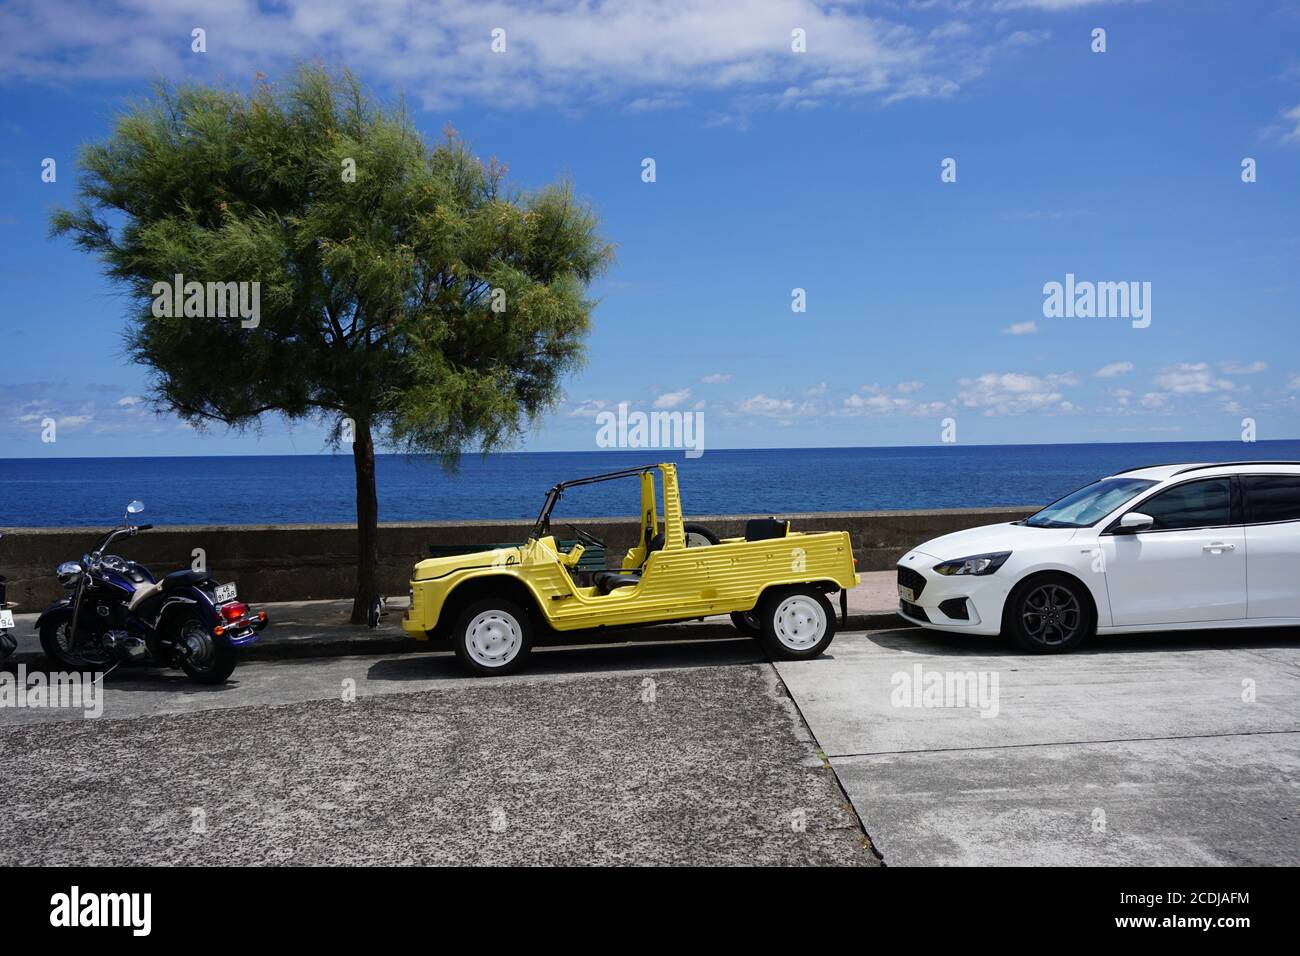 Roadside parking vehicles on the island São Miguel, Azores, Portugal, Europe Stock Photo